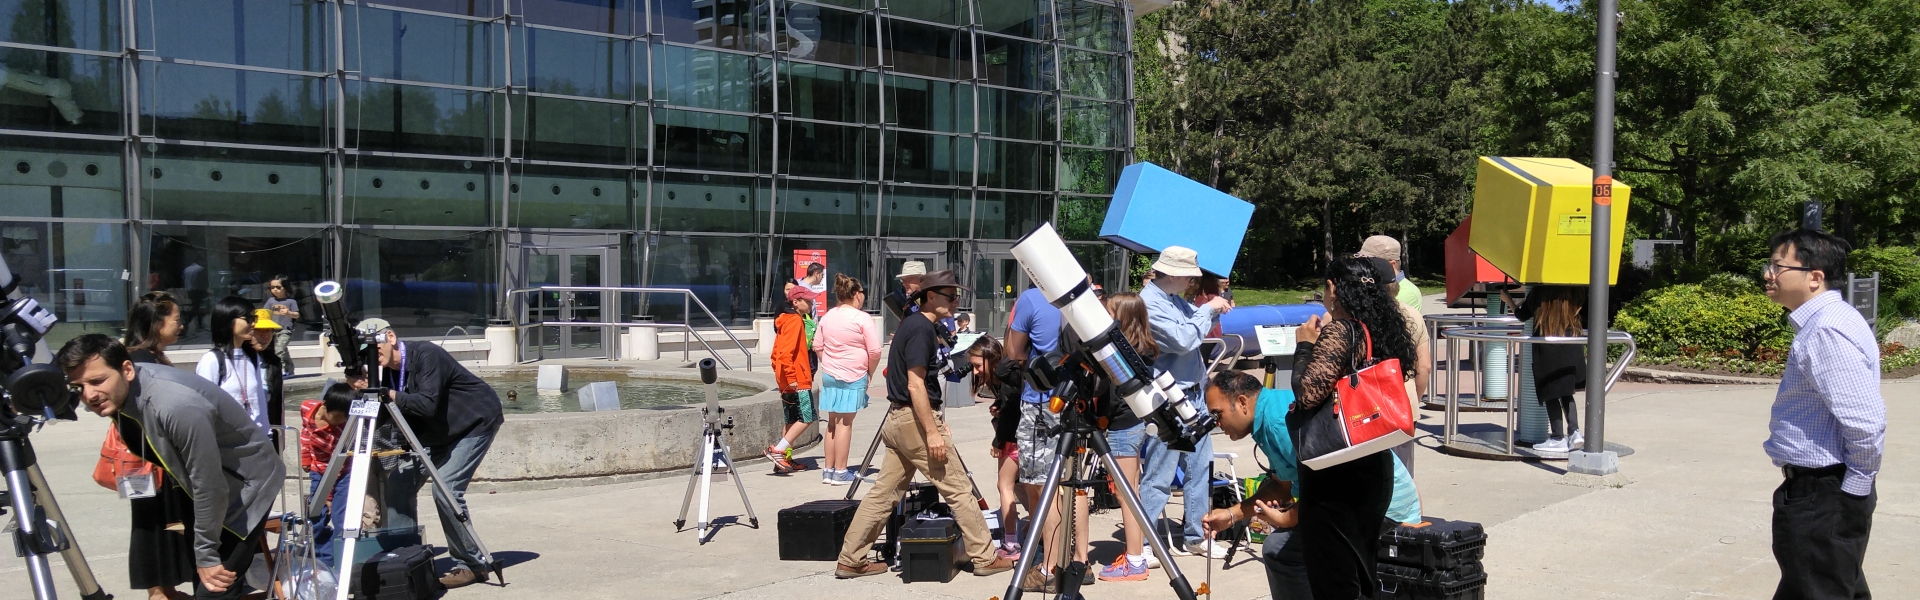 Free Solar Observation with the Royal Astronomical Society of Canada